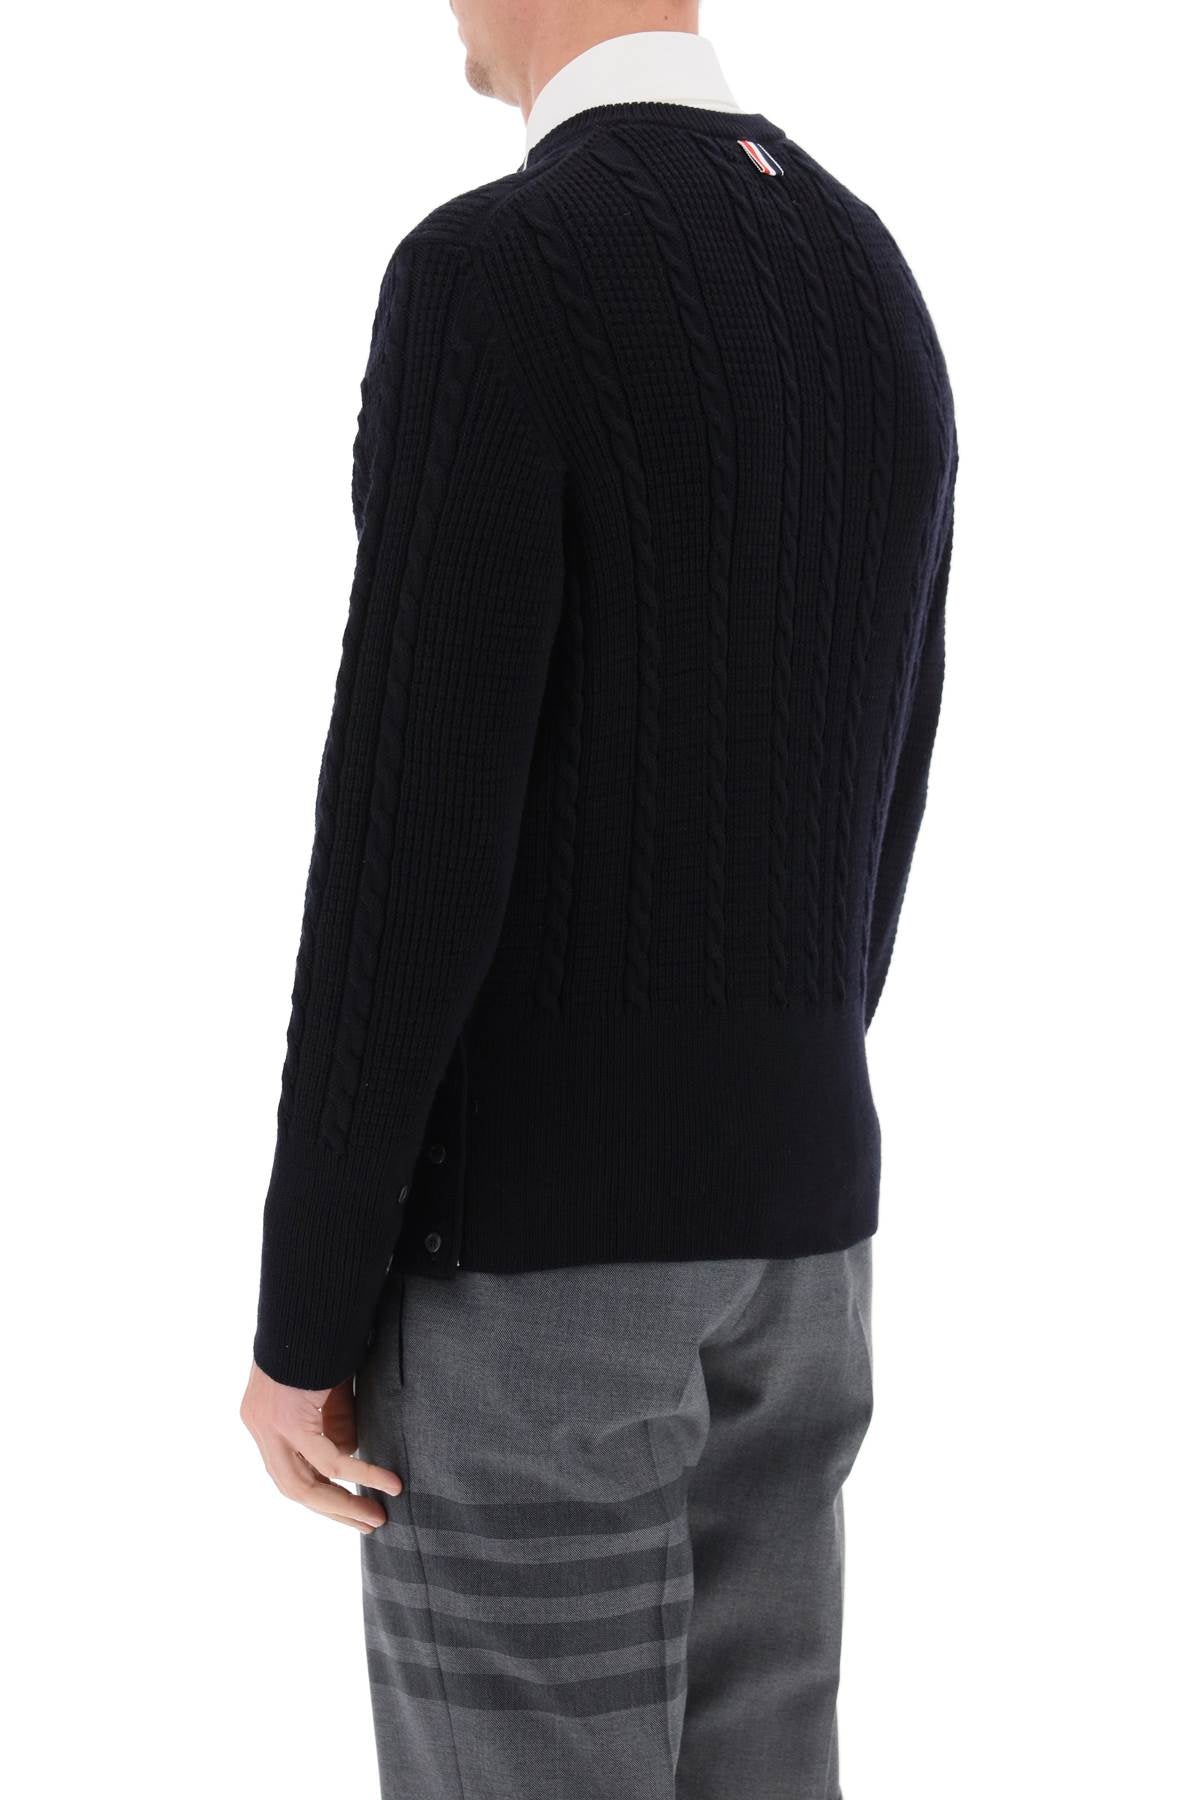 Thom browne cable wool sweater with rwb detail-2